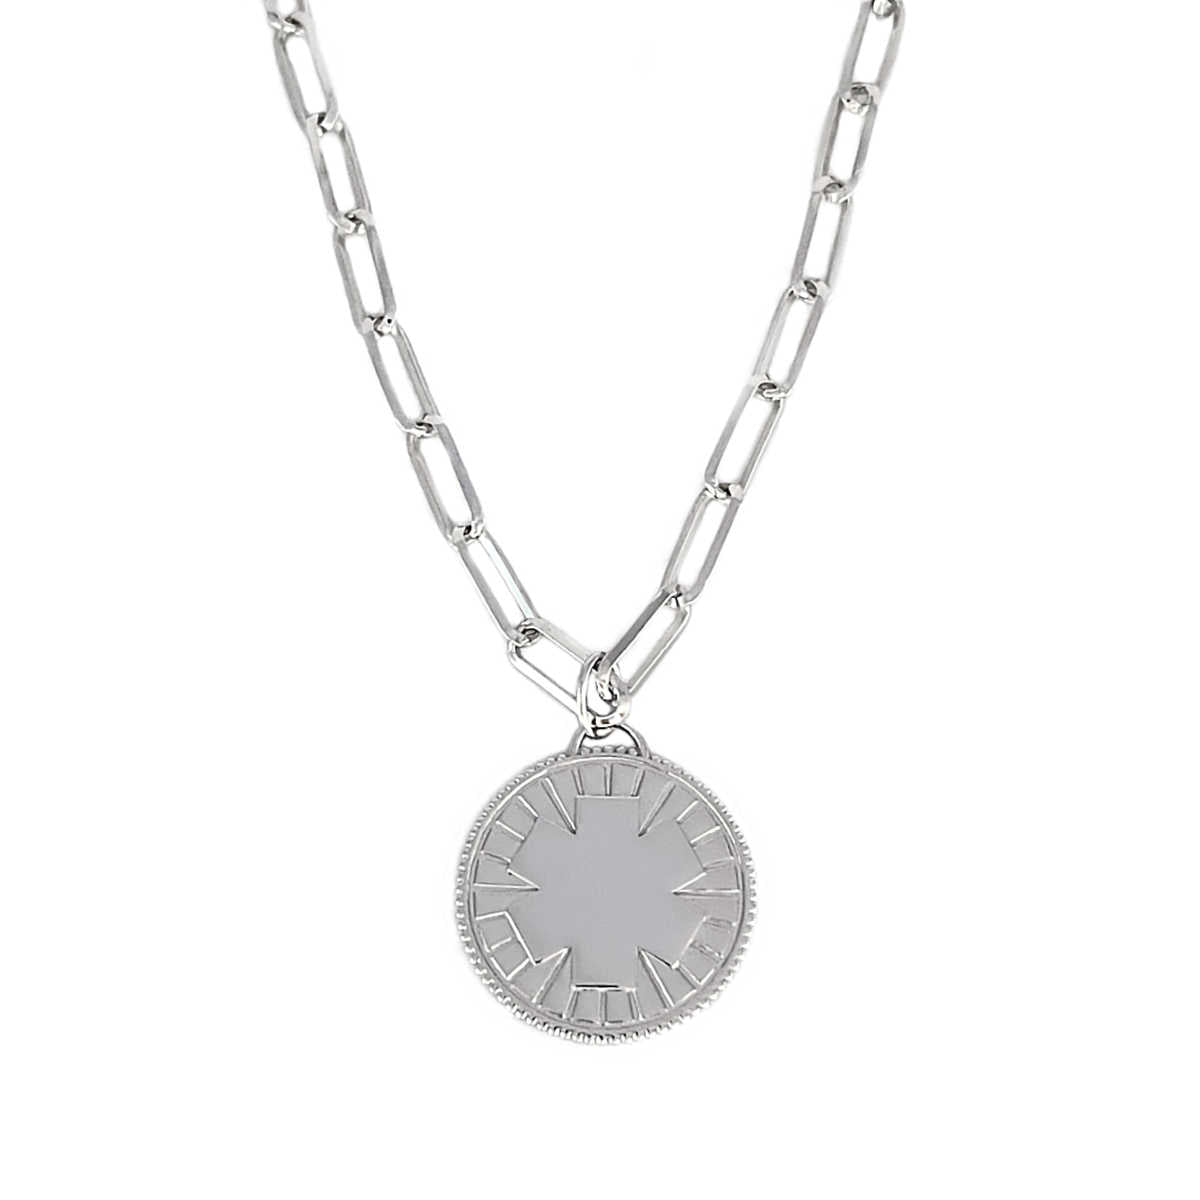 Sterling Silver Medallion Medical Alert Necklace | Engraved ID on Paperclip Chain | CHARMED Medical Jewelry